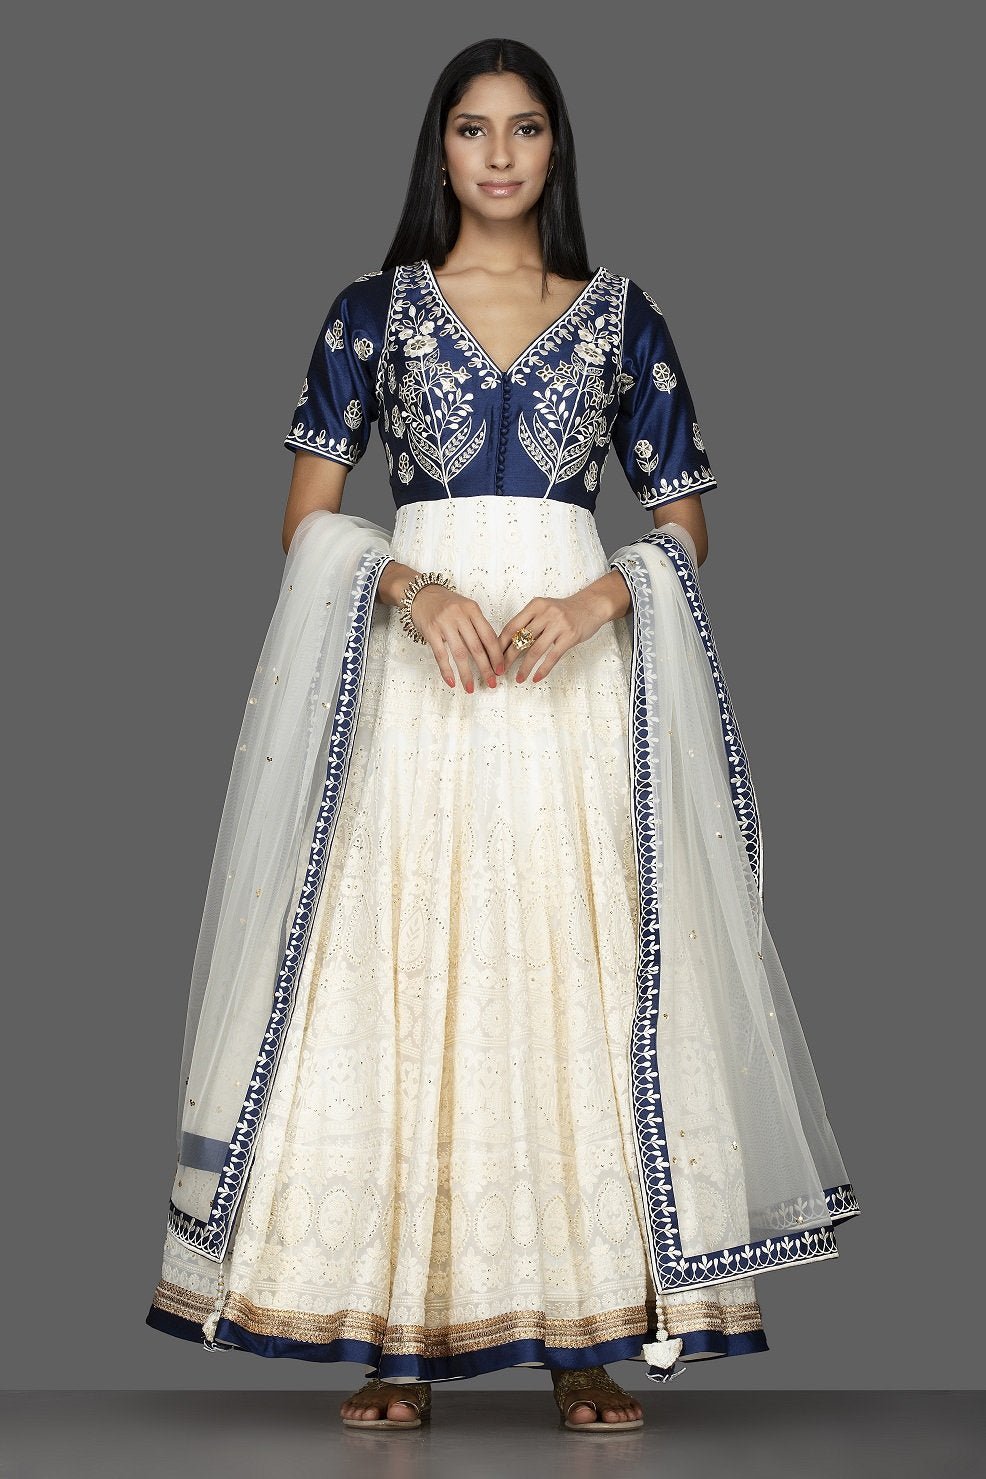 Buy beautiful off-white and blue Lucknowi work georgette Anarkali suit online in USA with dupatta. Spread ethnic elegance on weddings and special occasions in splendid designer lehengas, Anarkali suits crafted with exquisite Indian craftsmanship from Pure Elegance Indian fashion store in USA.-full view